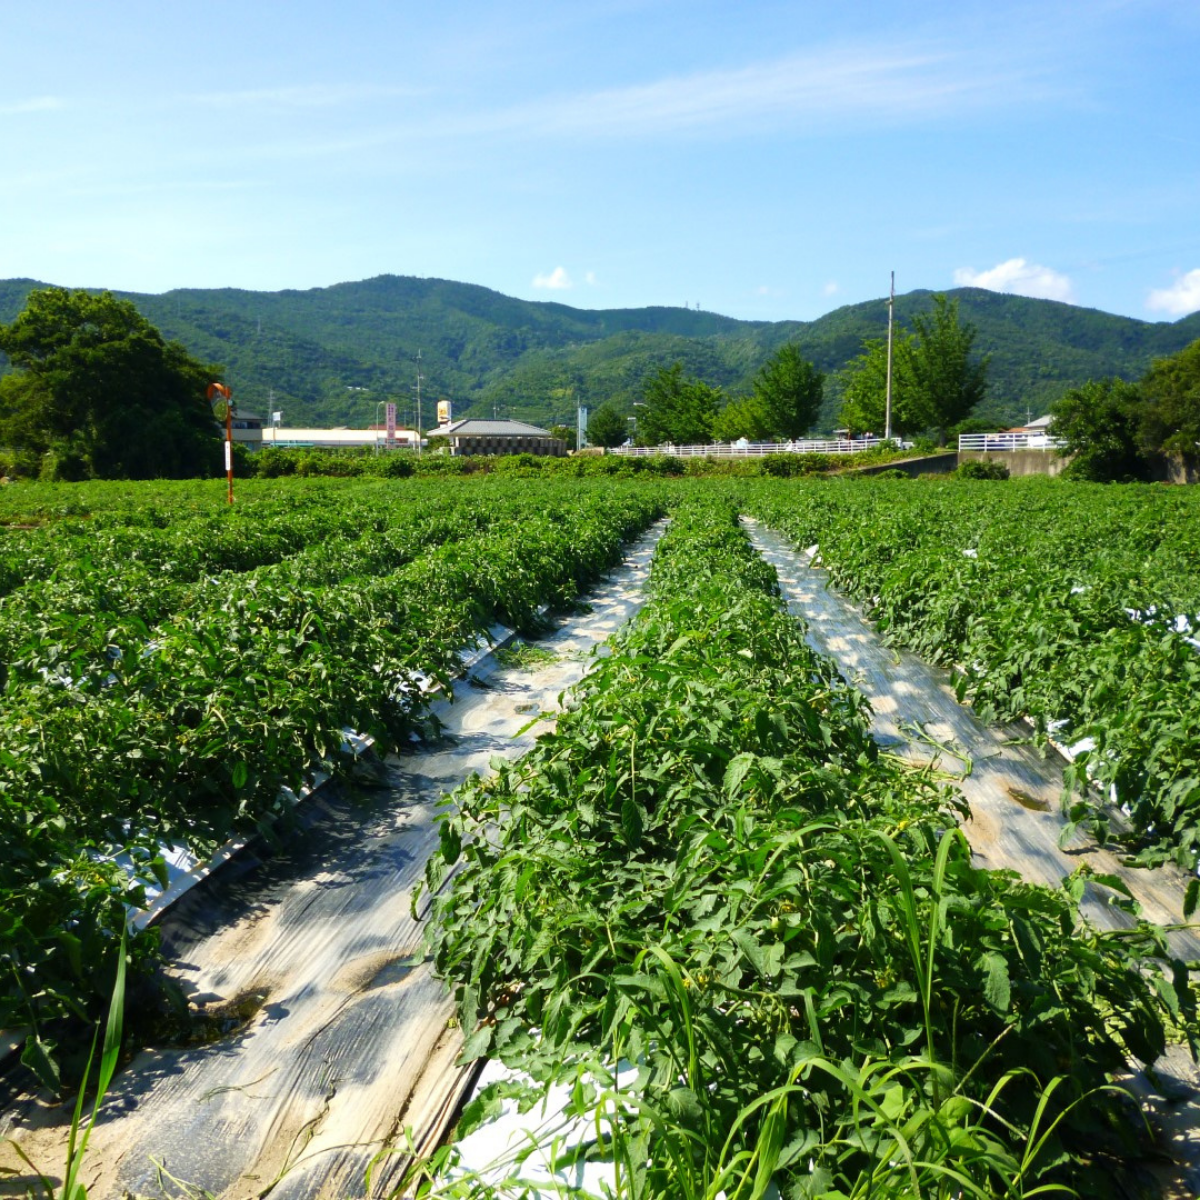 Organic farm surrounded by mountains